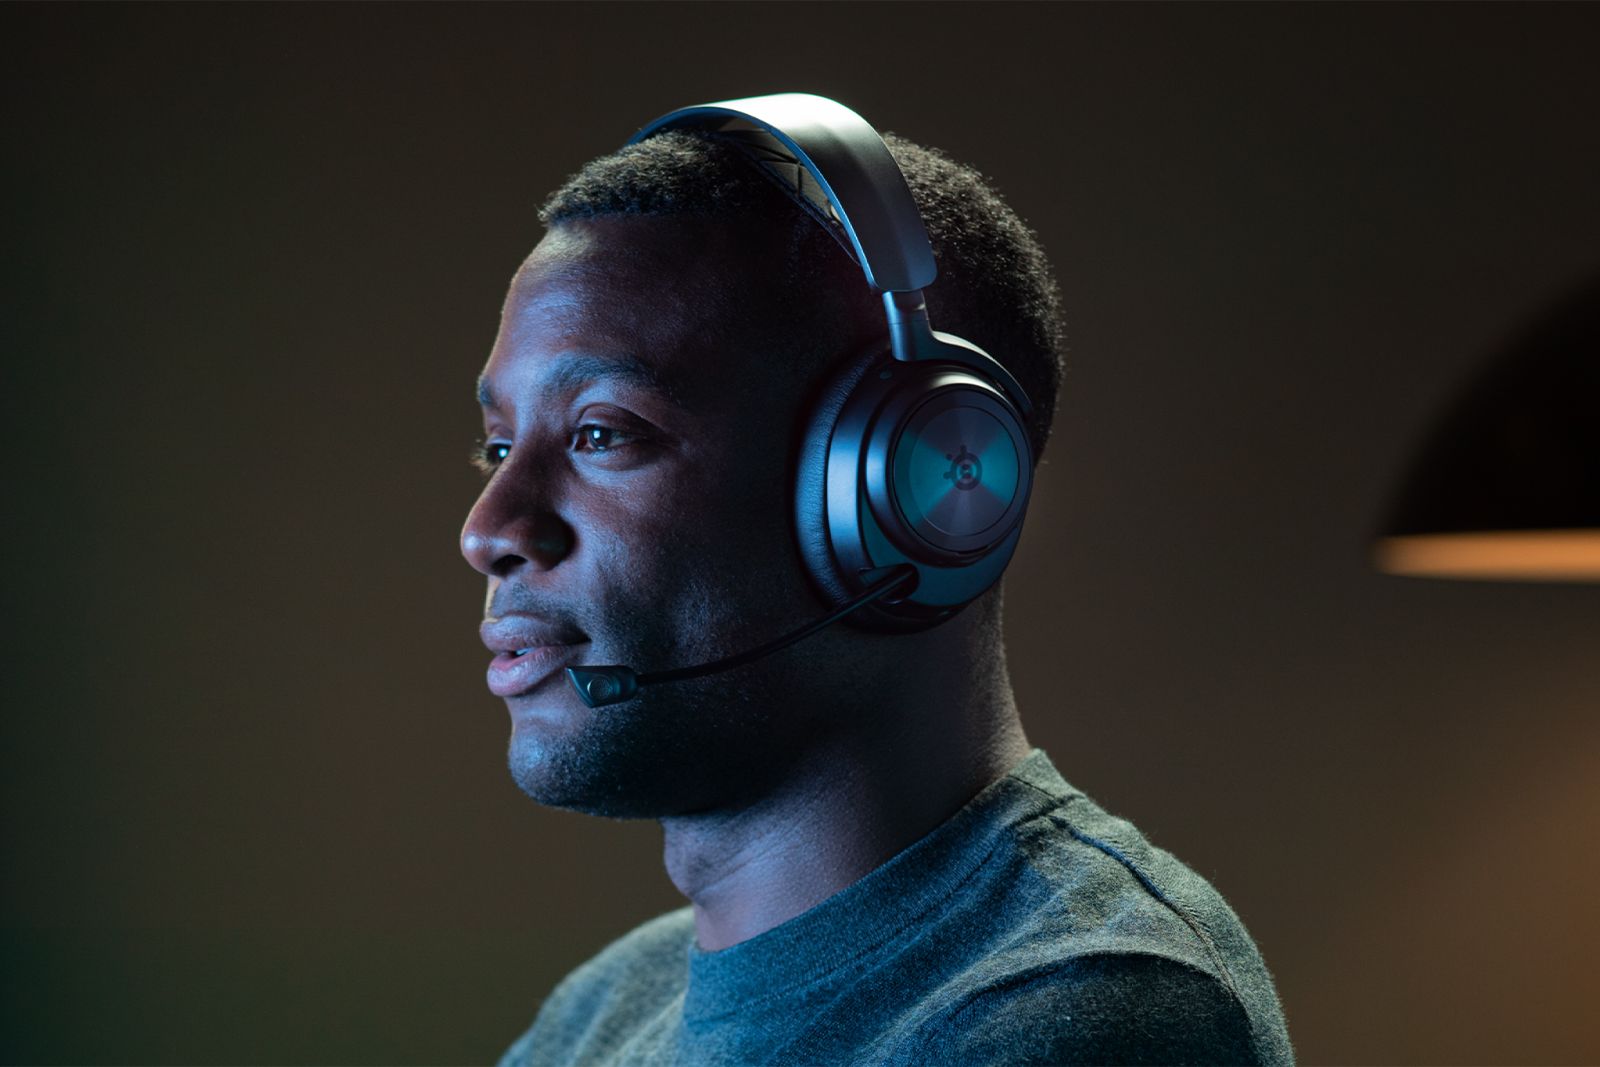 Steelseries Arctis Nova Pro headsets - high fidelity audio with a fresh new look photo 1